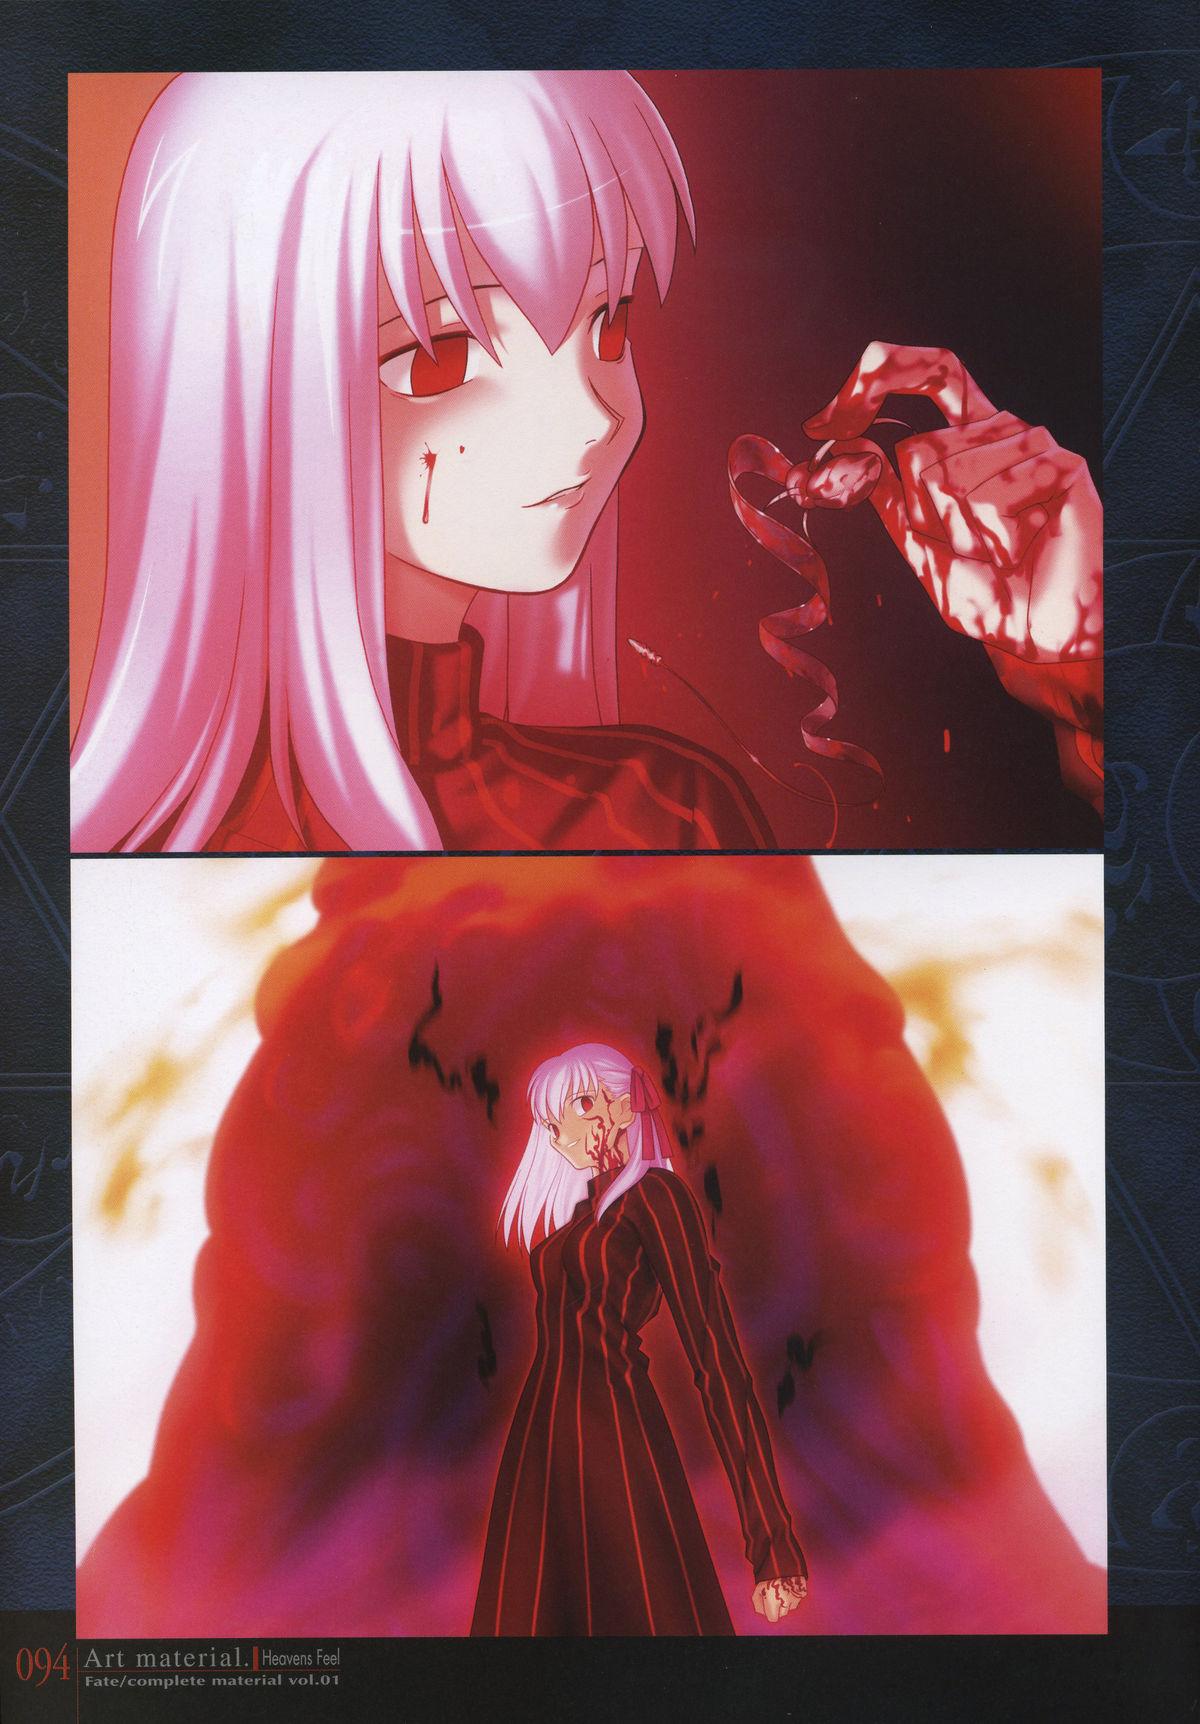 Fate/complete material I - Art material. 98